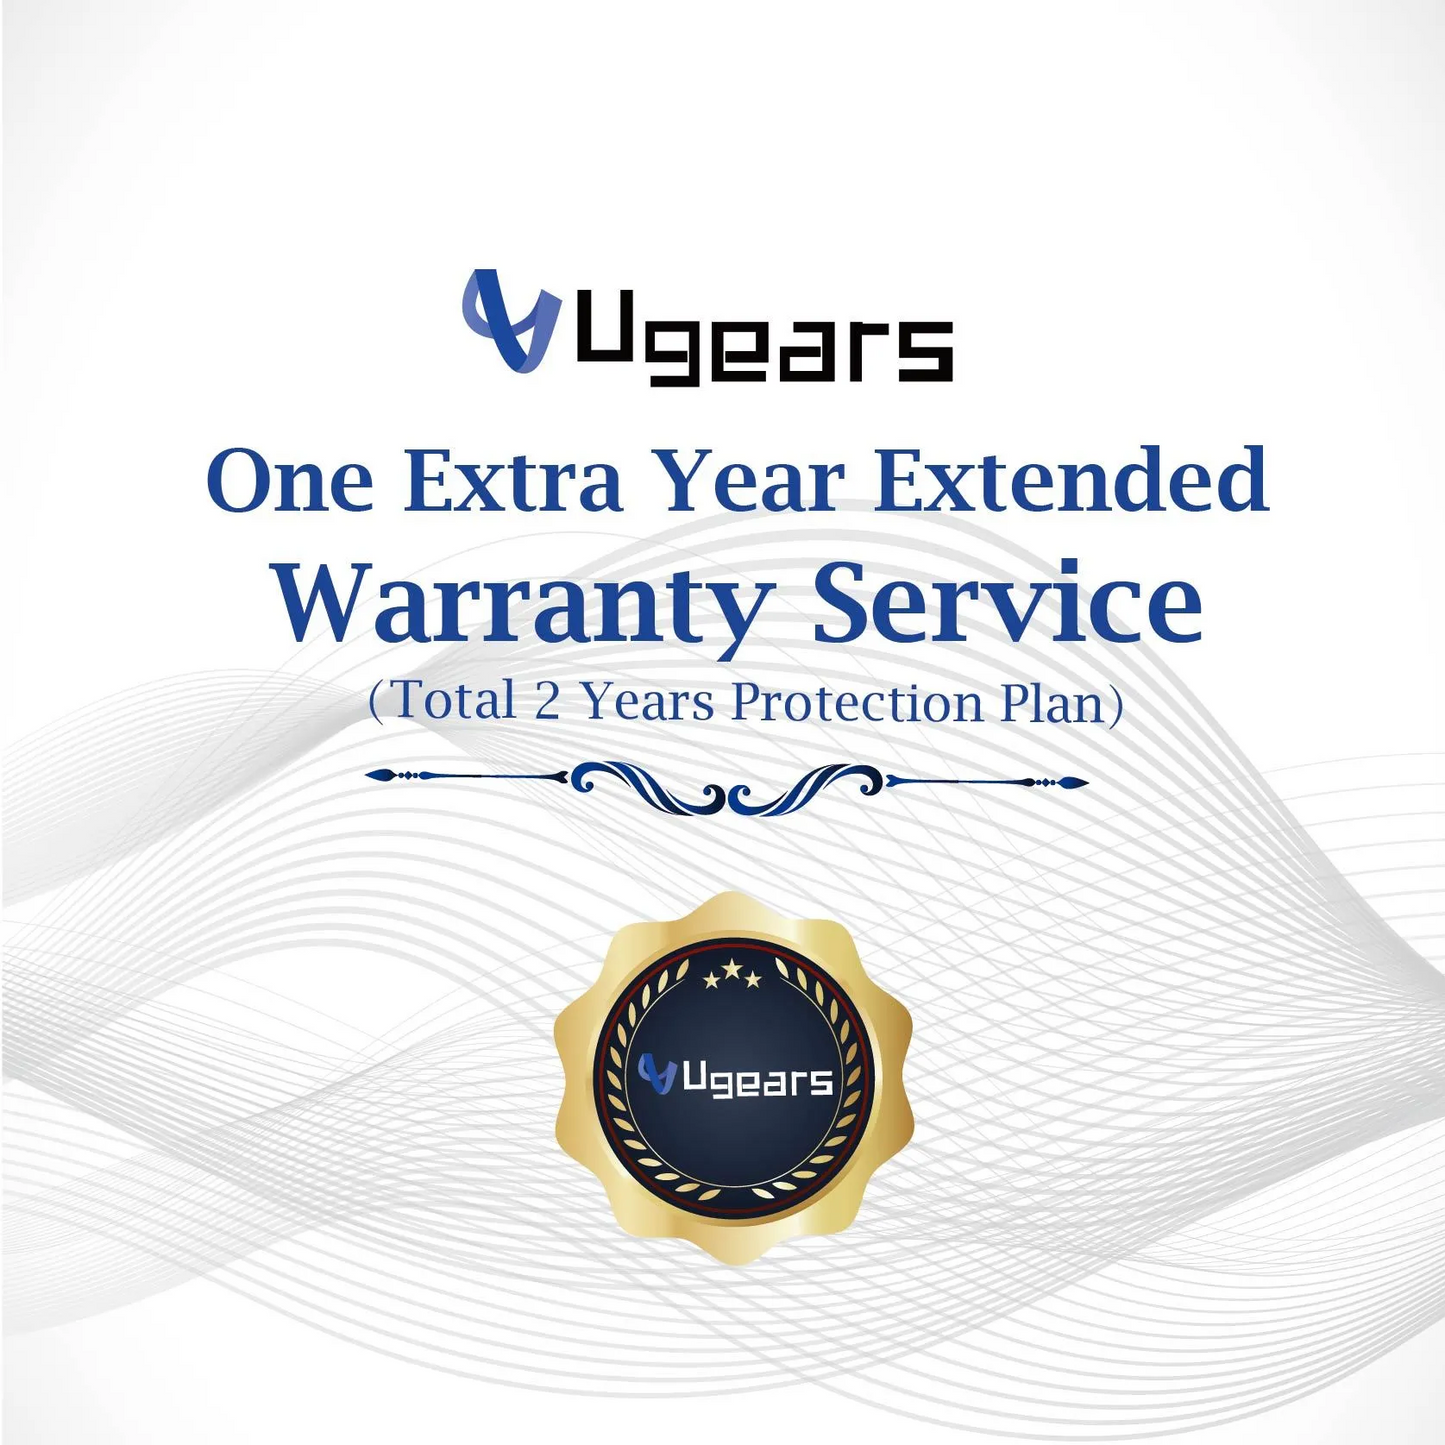 One Extra Year Extended Warranty Service (Non-Physical Items, No Need To Ship)